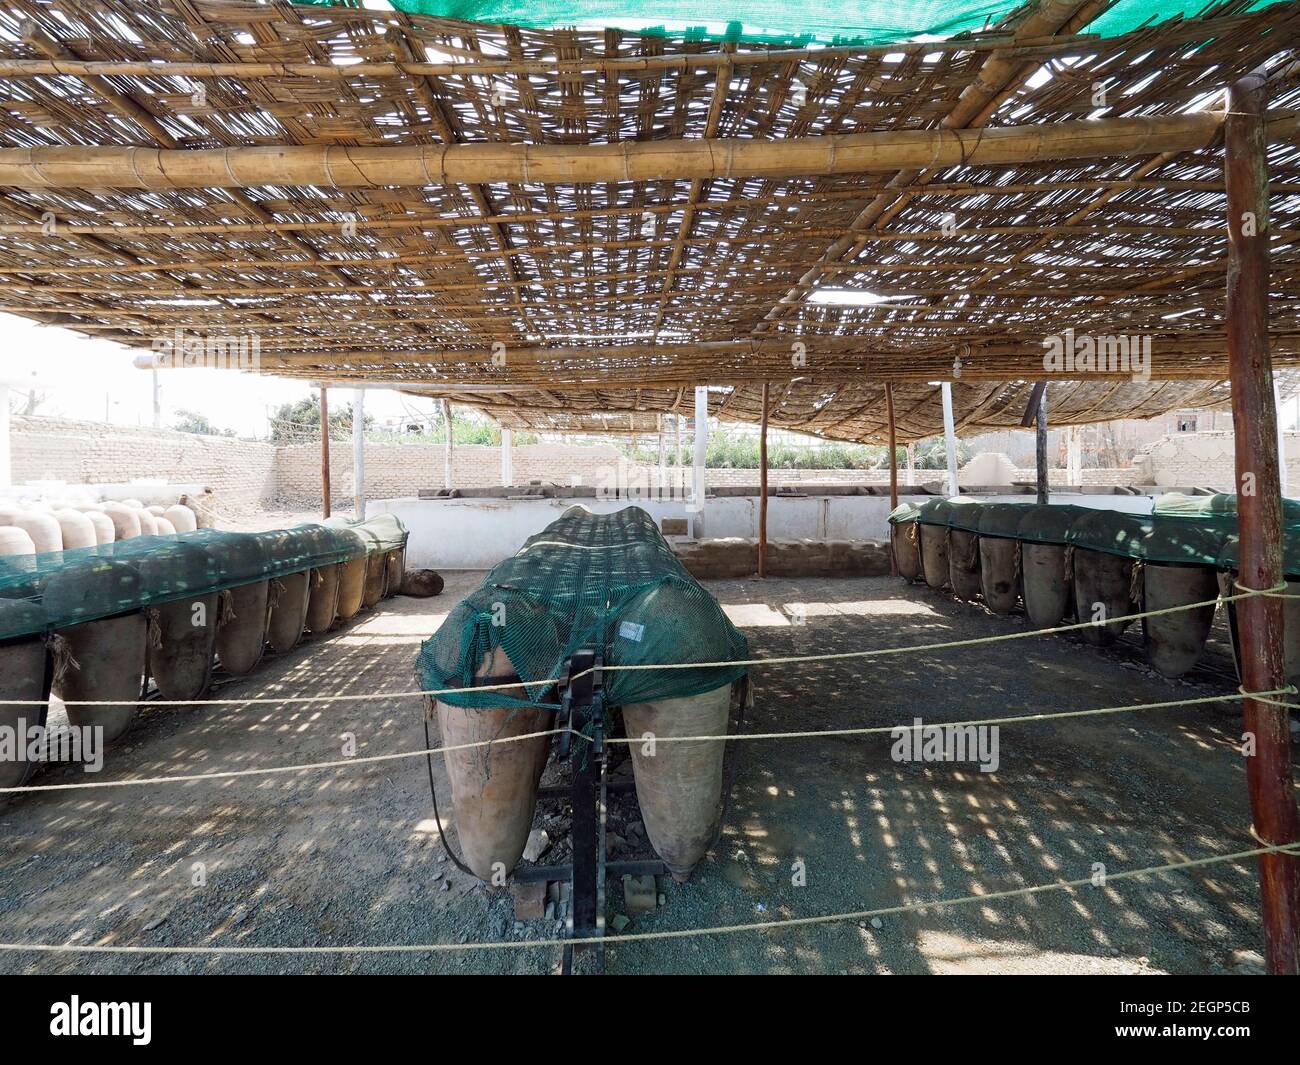 Ceramic vases covered under a green net and a bamboo roof, bases used fro the wine and pisco production in peru Stock Photo